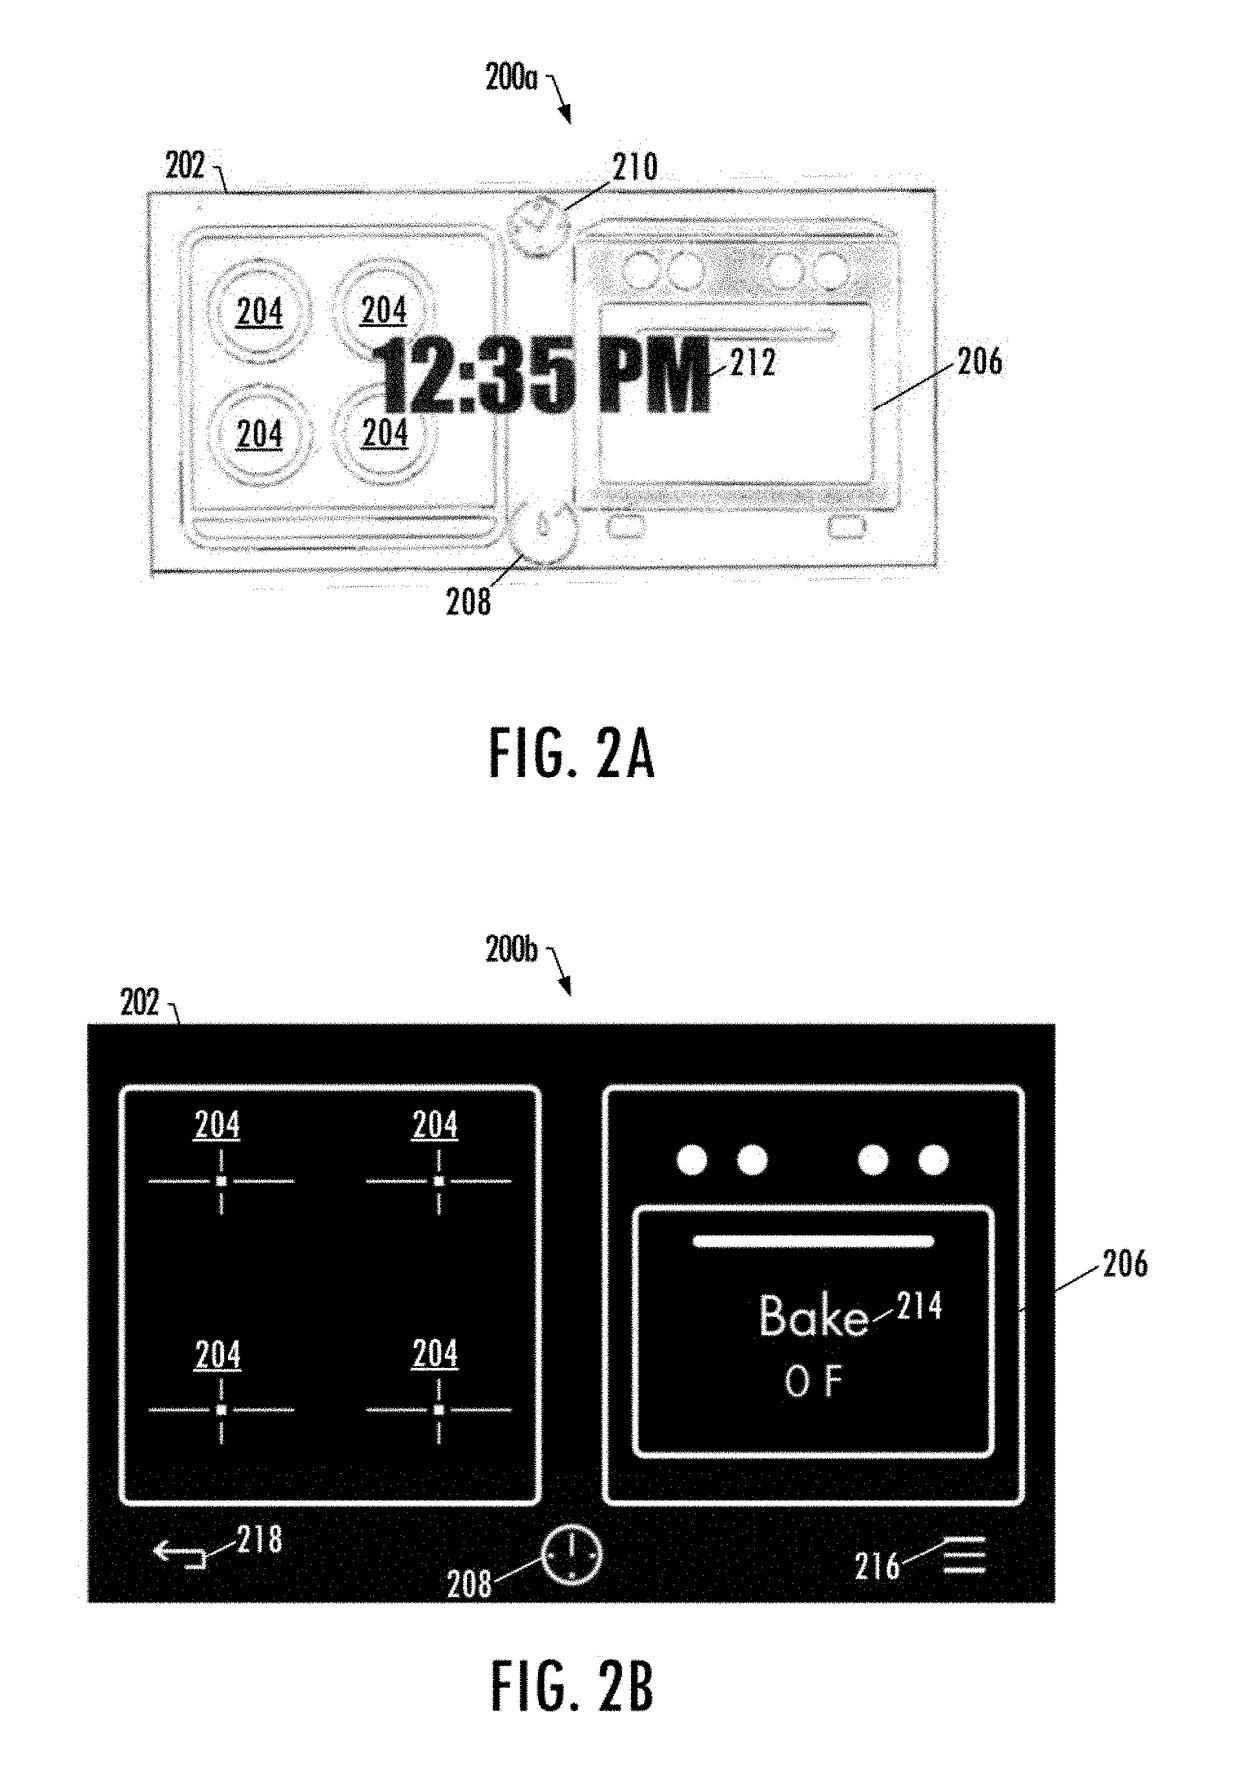 Drag-and-set user interface for appliances